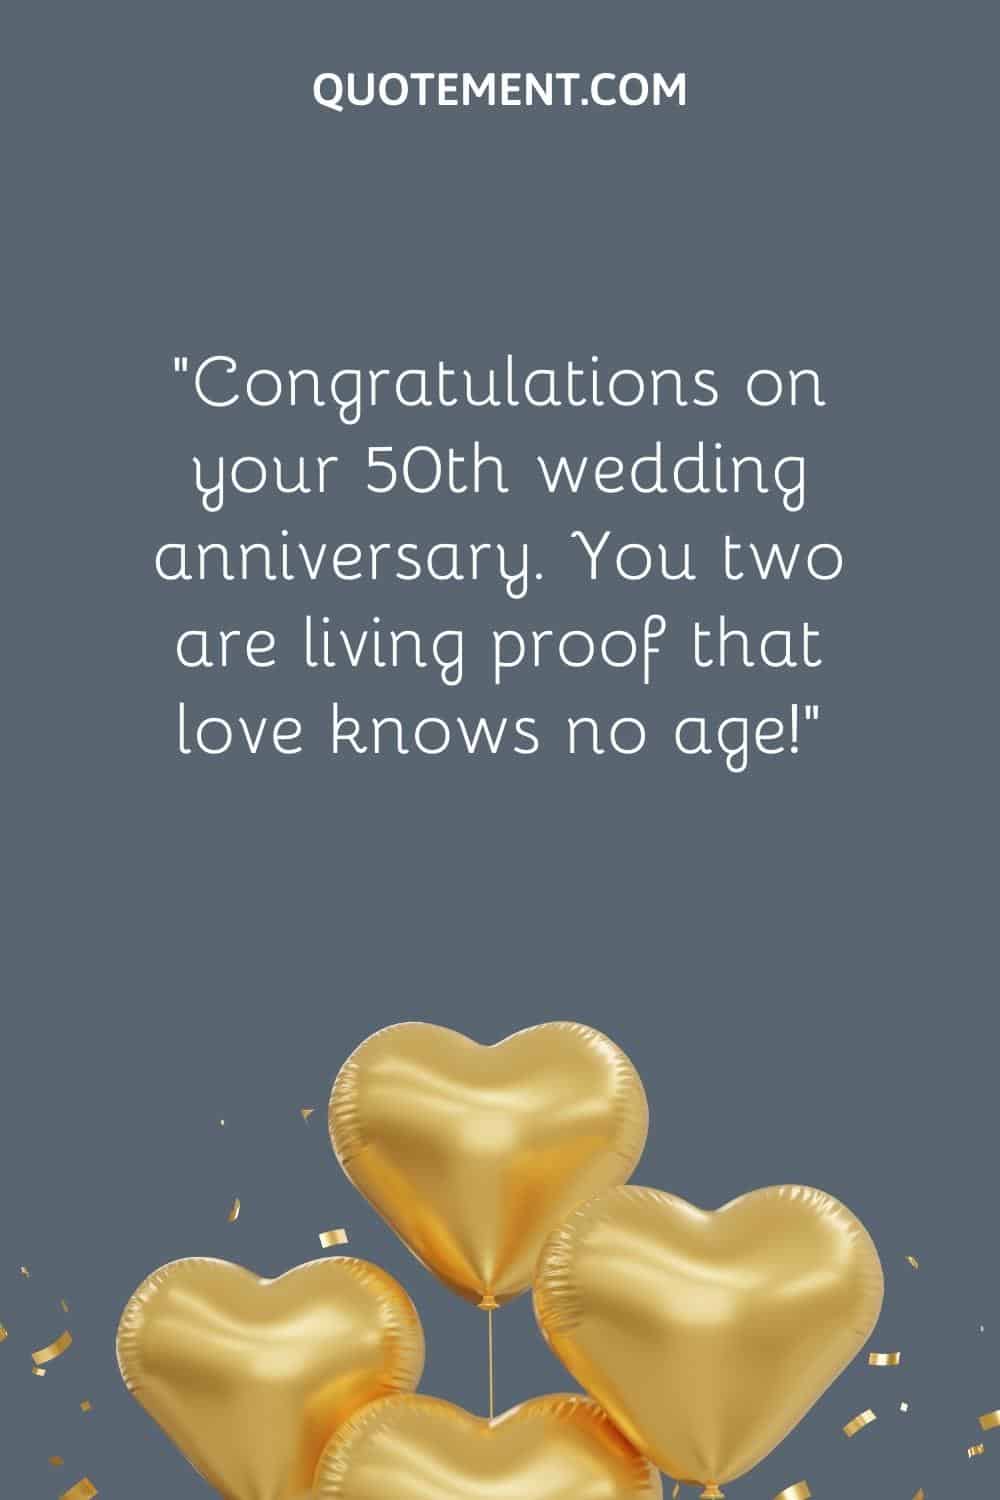 Gold and a heart represent your grandparents' golden anniversary.